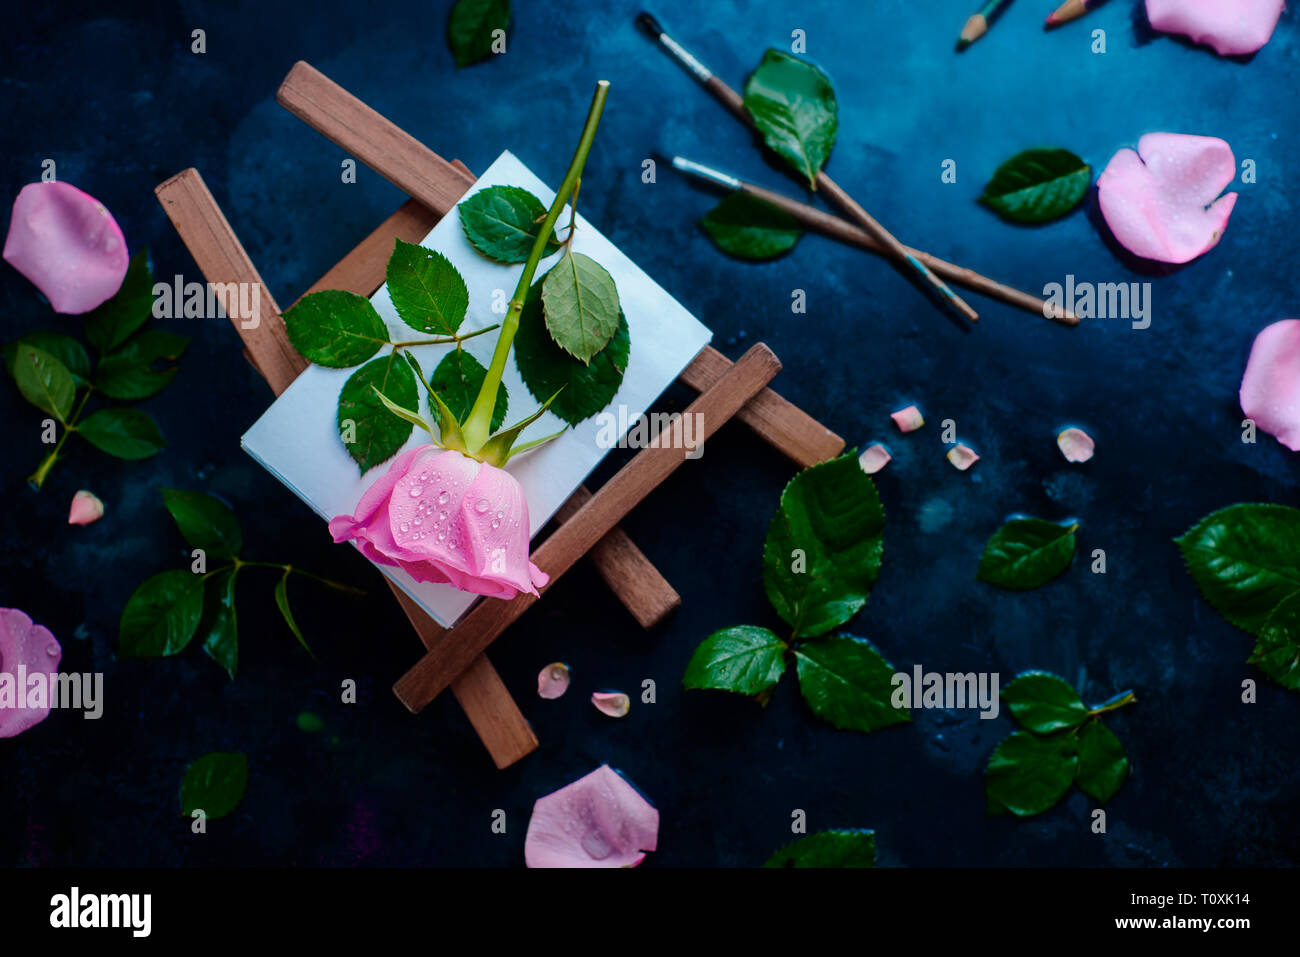 Rose flower on a painter easel flat lay. Painting tools, brushes and pencils on a wet rainy background with copy space. Nature and art concept Stock Photo